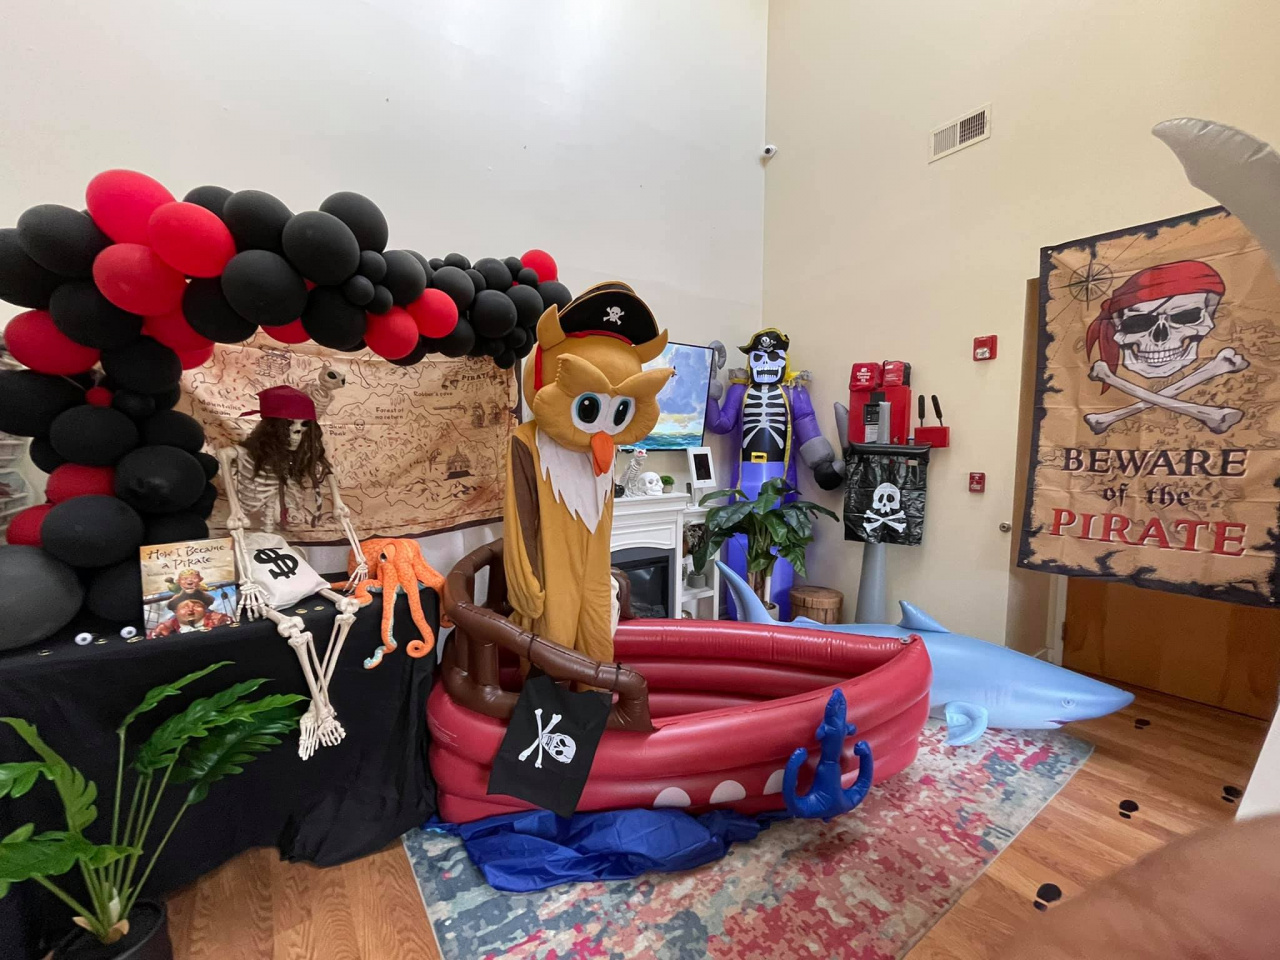 Pirate-Themed School Decorations for Halloween.